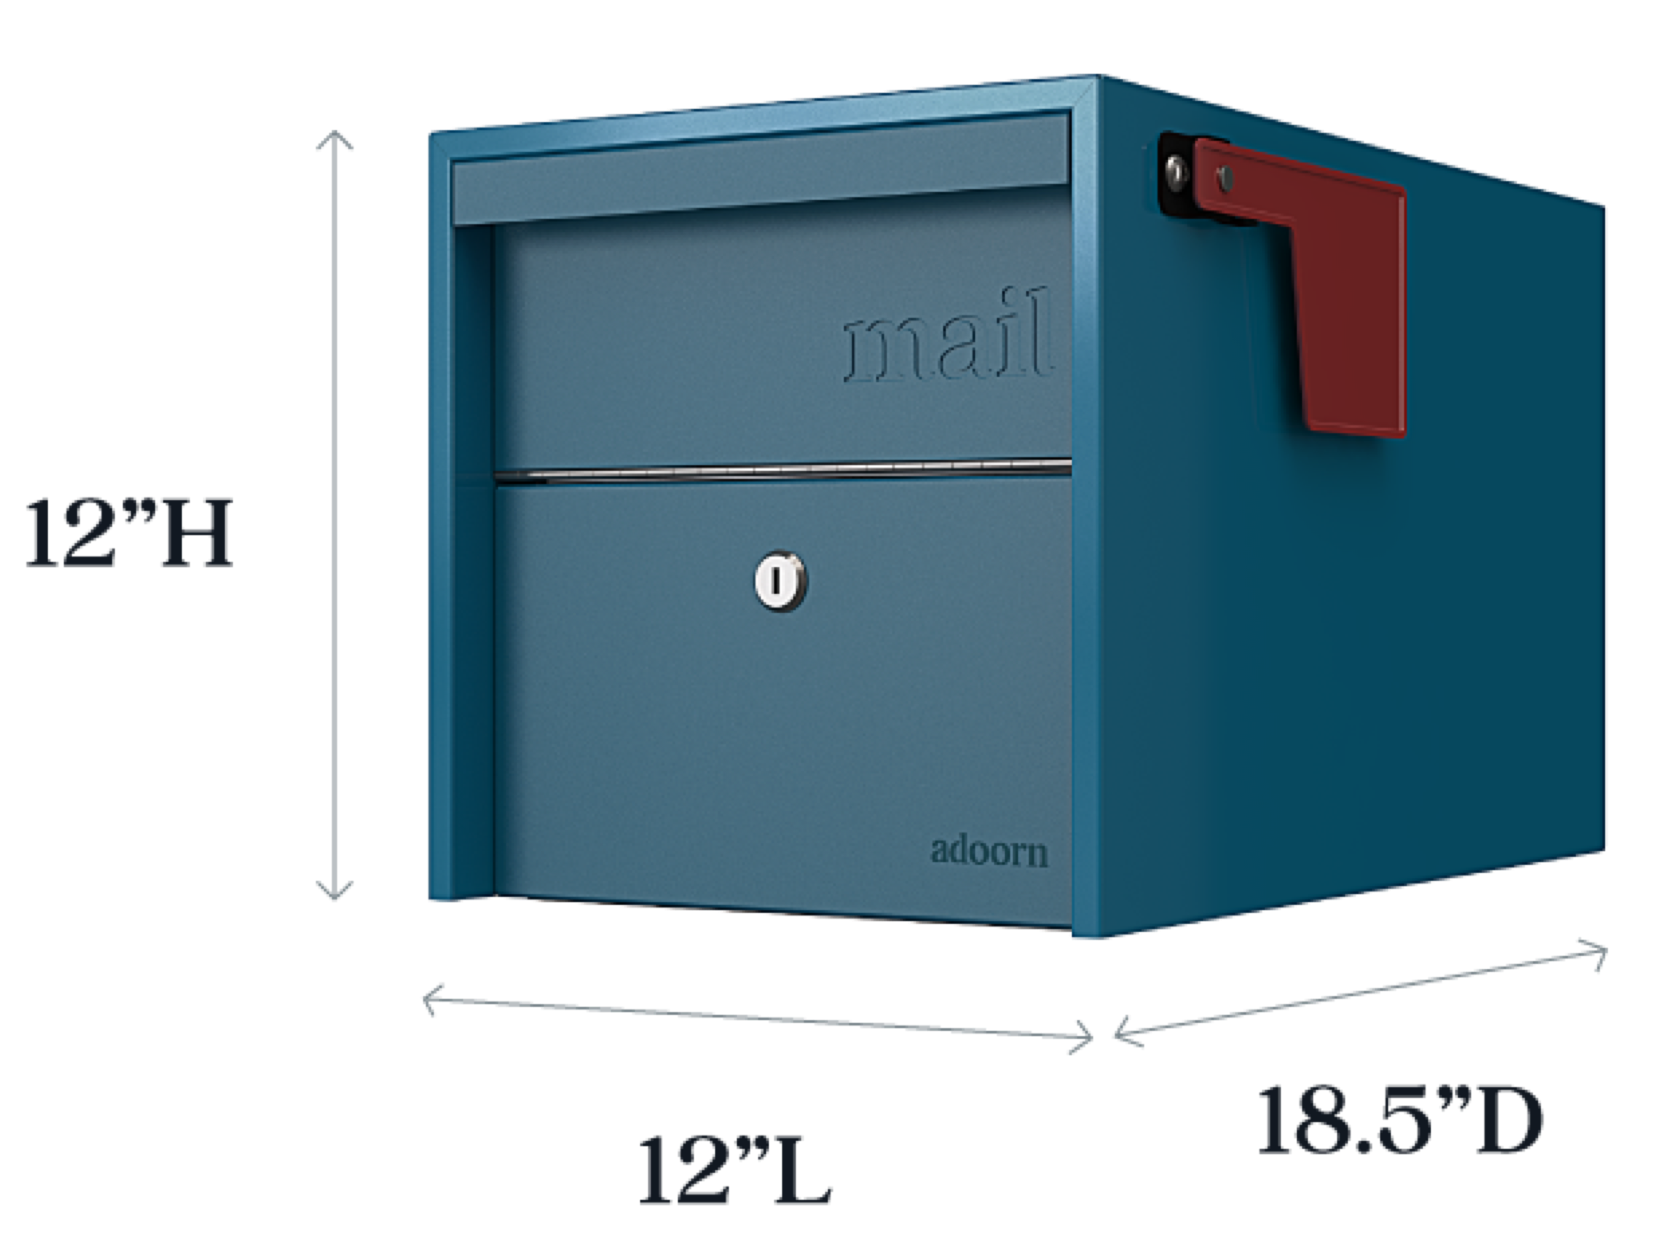 Large Capacity Receives Mail + Packages